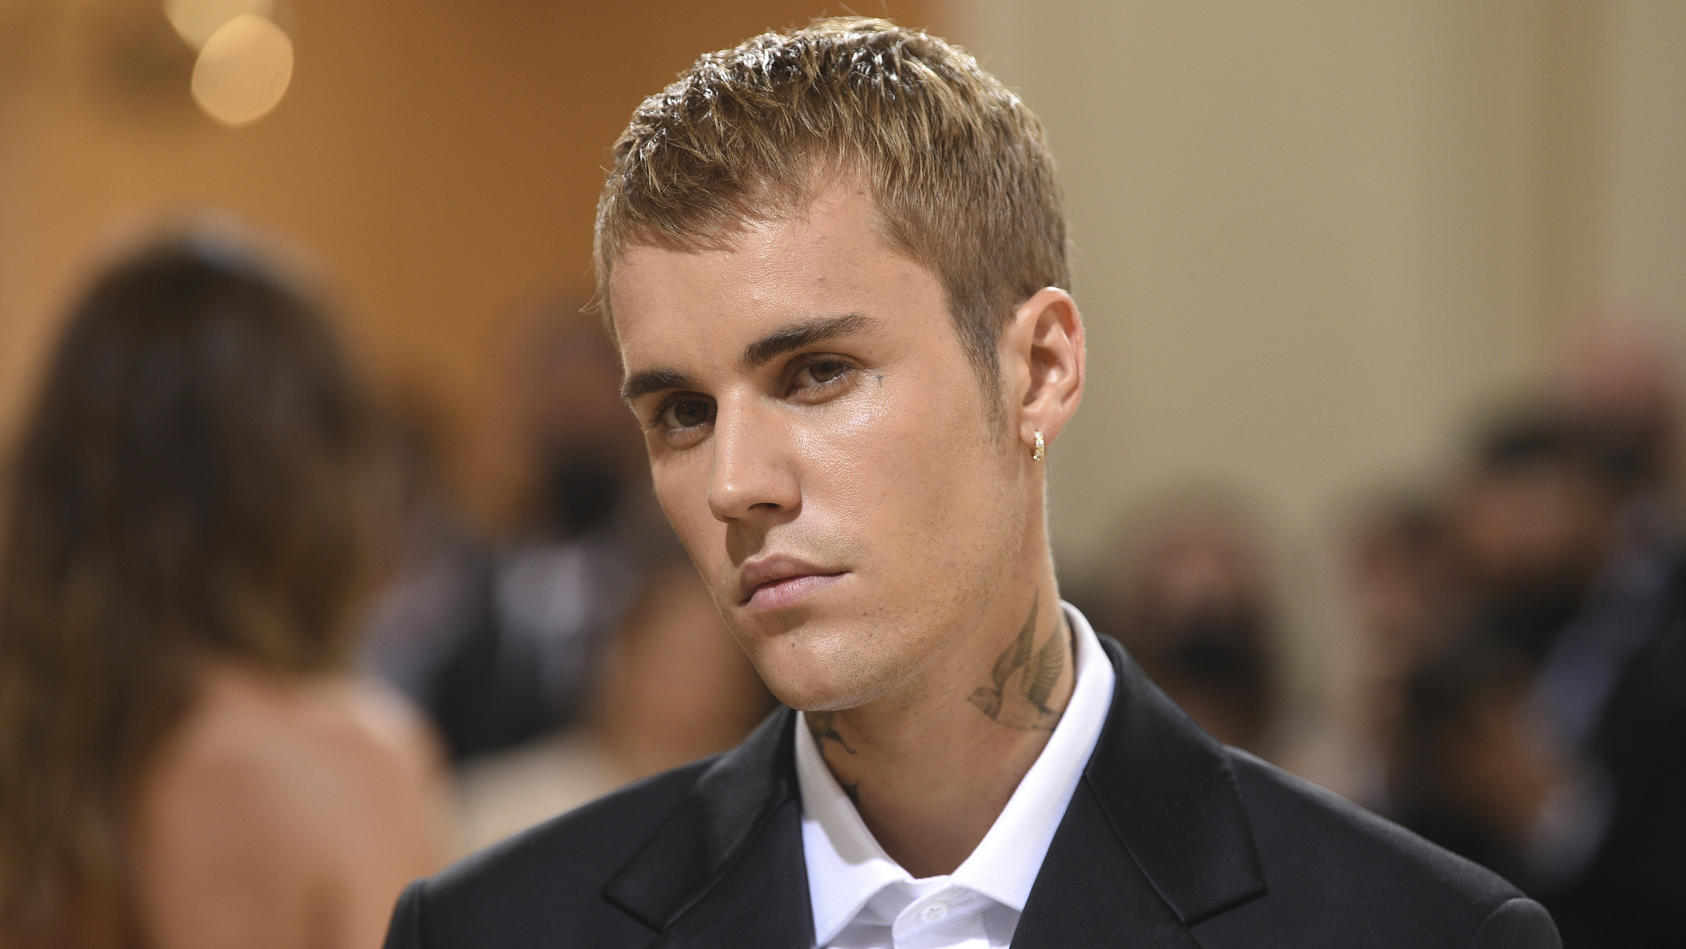 FILE - Justin Bieber attends The Metropolitan Museum of Art's Costume Institute benefit gala on Sept. 13, 2021, in New York. Bieber leads the iHeartRadio Music Award nominations. The awards show will air from Los Angeles on March 22. (Photo by Evan A